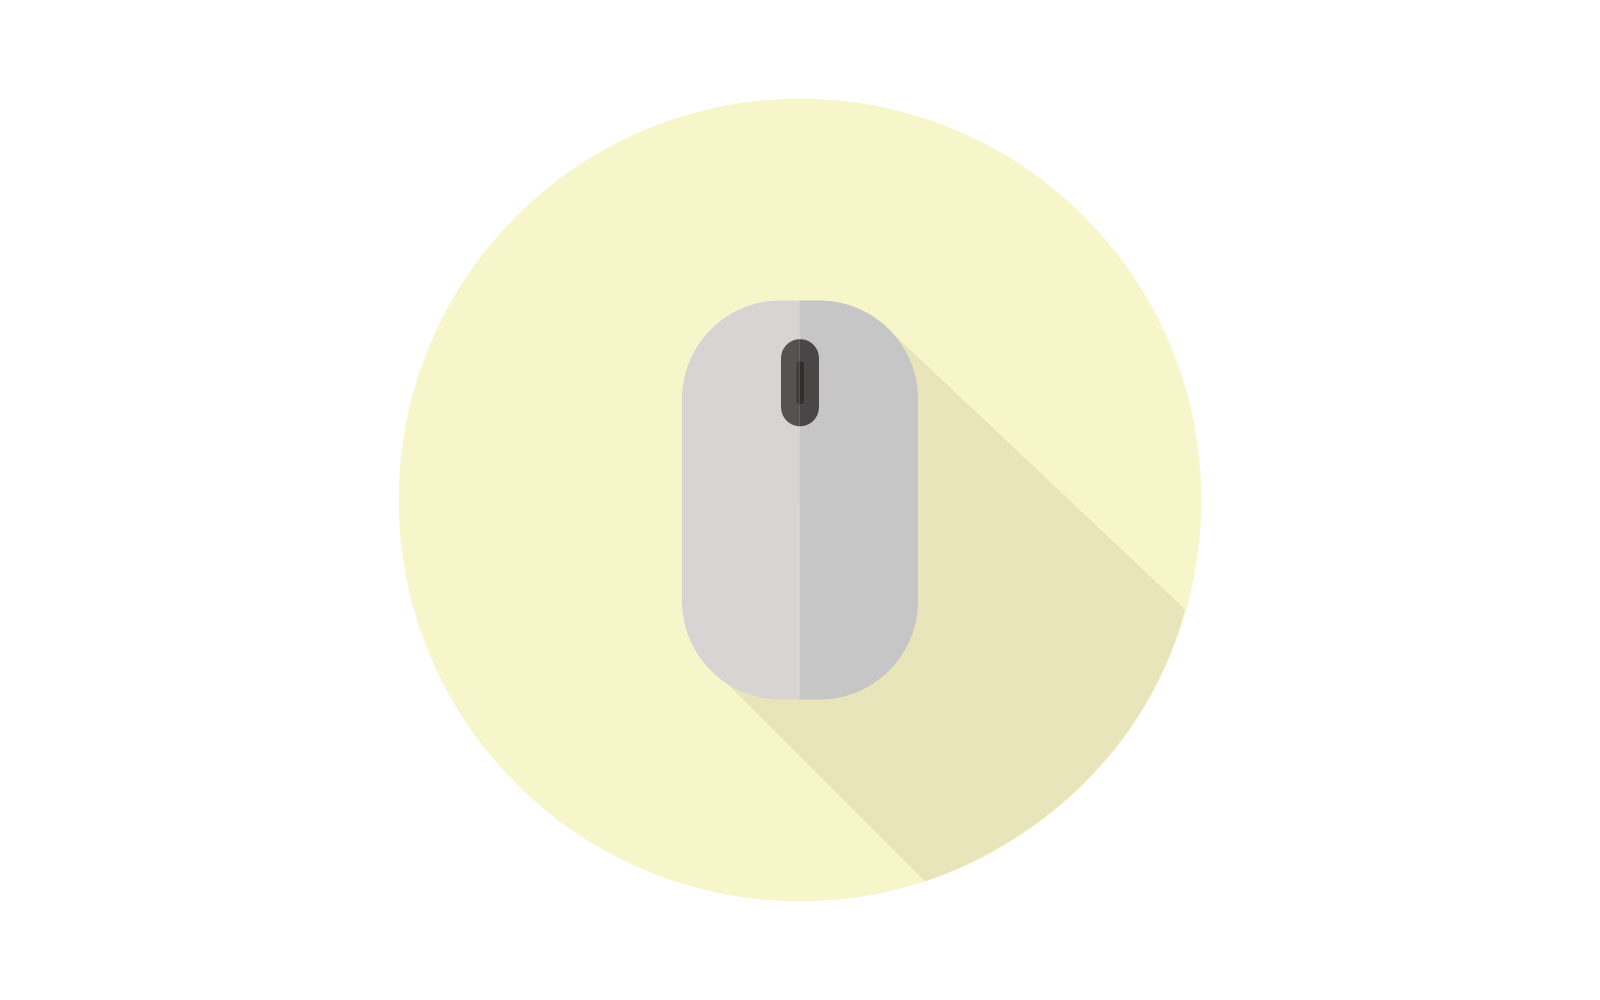 Mouse illustrated in vector on a white background